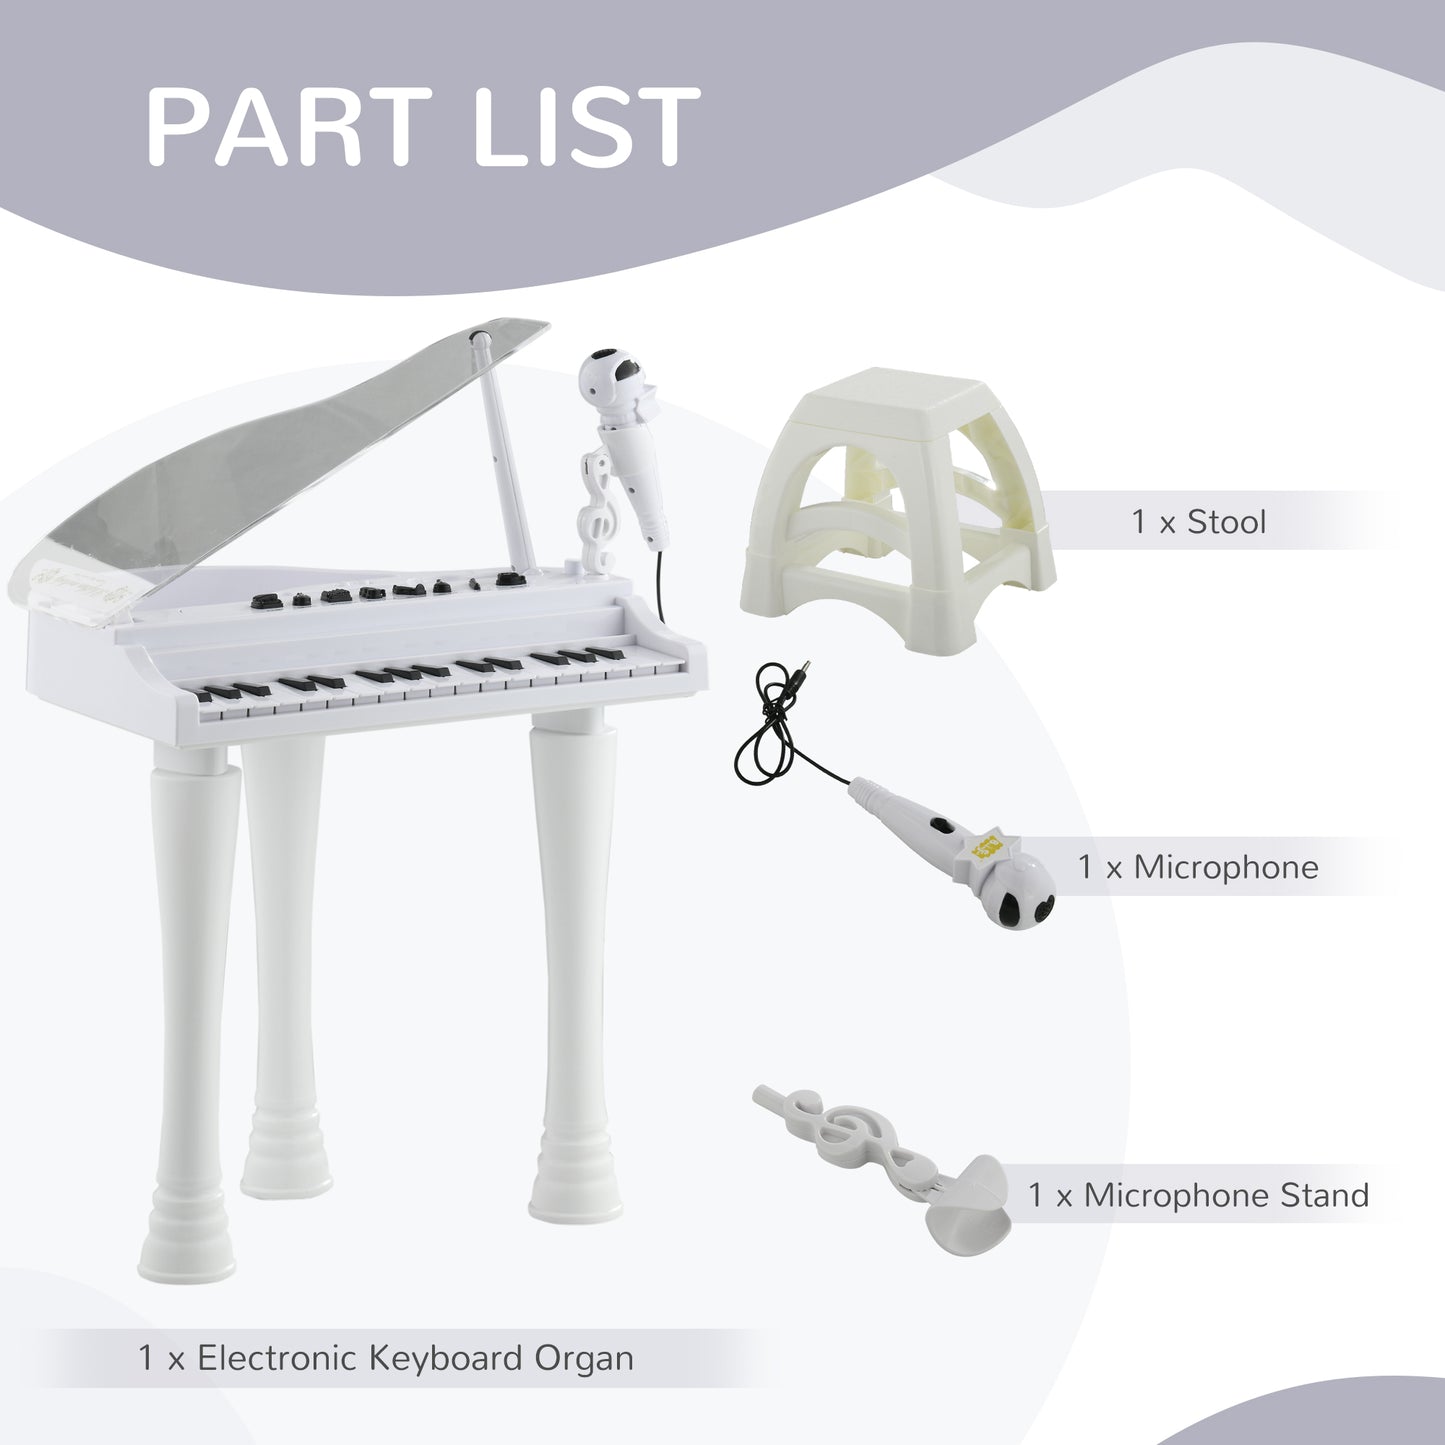 AIYAPLAY 32Key Kids Piano Keyboard with Stool Lights Microphone Sounds Removable Legs White